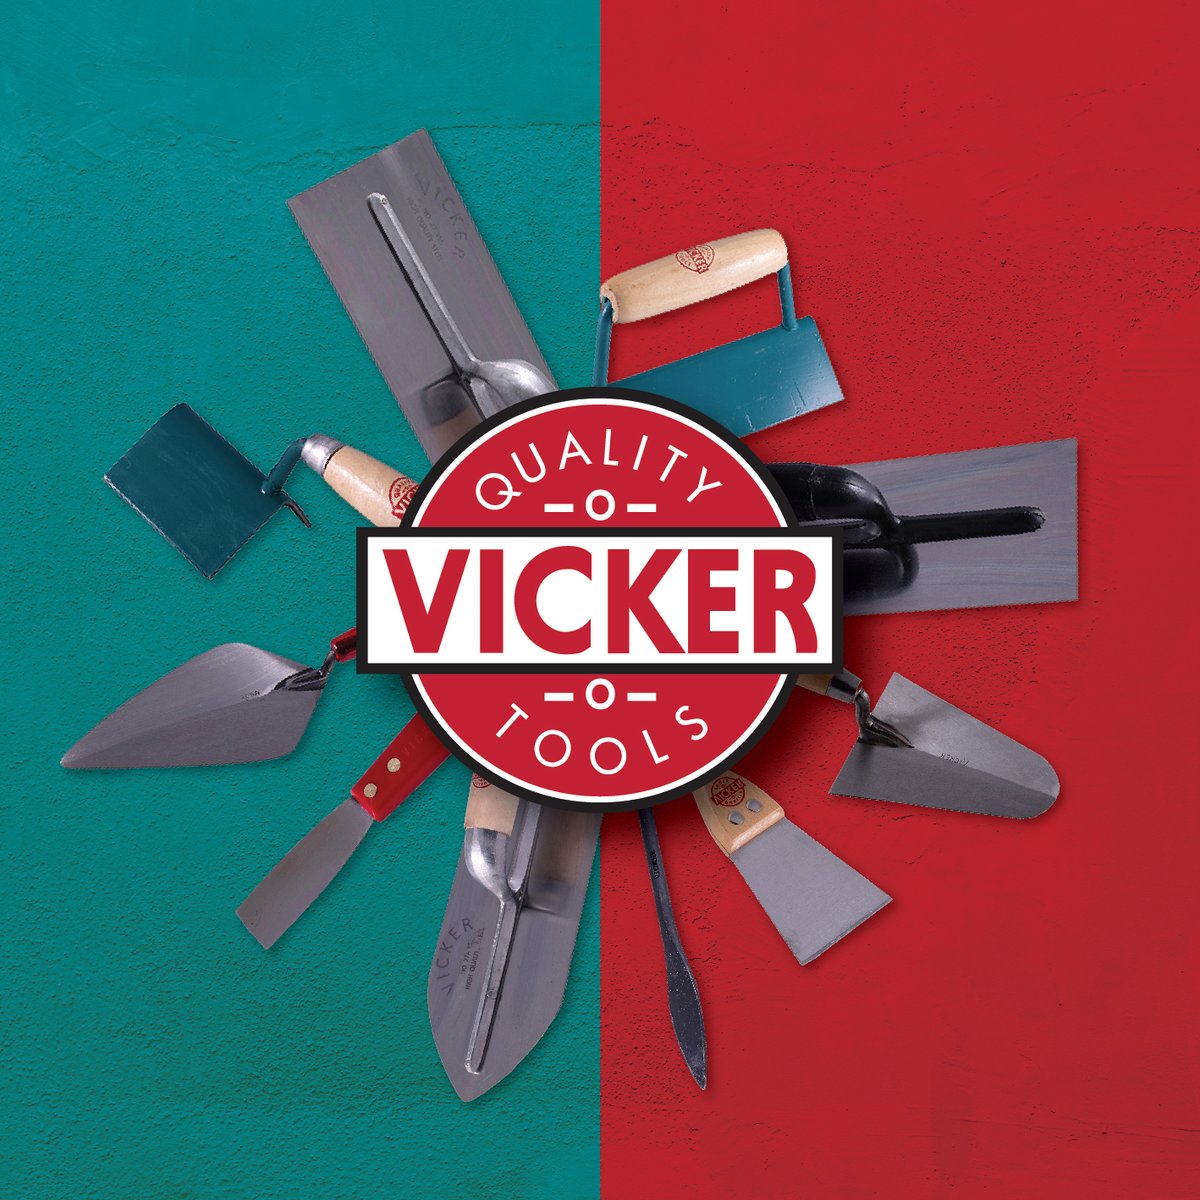 Why Vicker Tools?

✅ Unrivalled Quality
✅ Versatile Range
✅ Innovation at its Core 
✅ Trusted by Experts
✅ Your Success, Our Priority

#VickerTools #CraftsmanshipRedefined #PrecisionInEveryTool #DIYEssentials #QualityTools #InnovationUnleashed